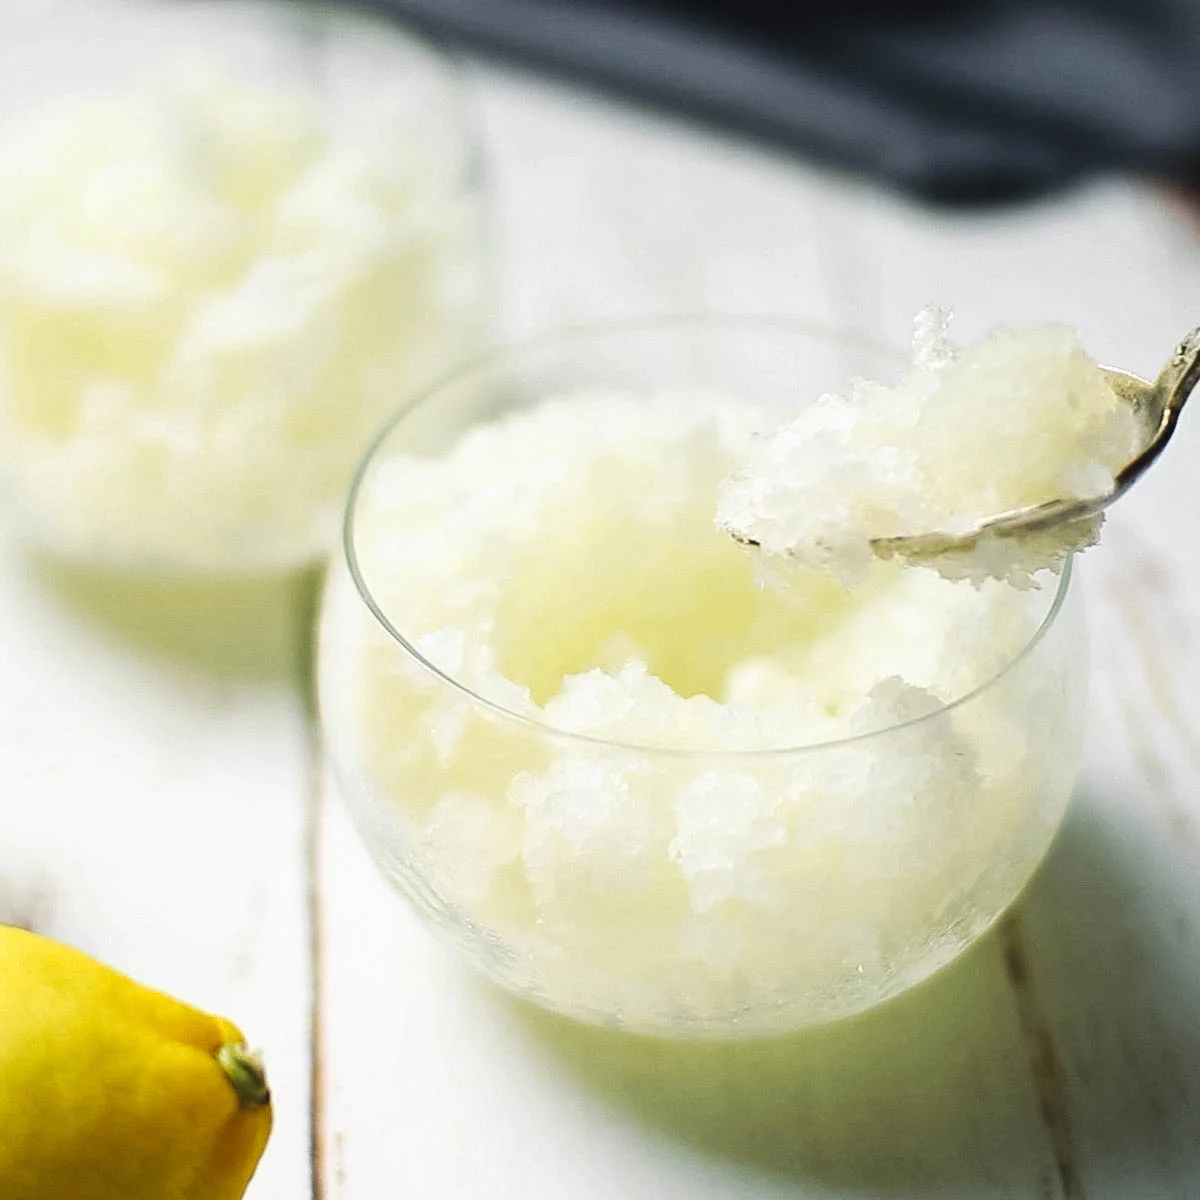 Here's a simple and easy-to-follow recipe for a refreshing lemon granita, perfect for hot summers.